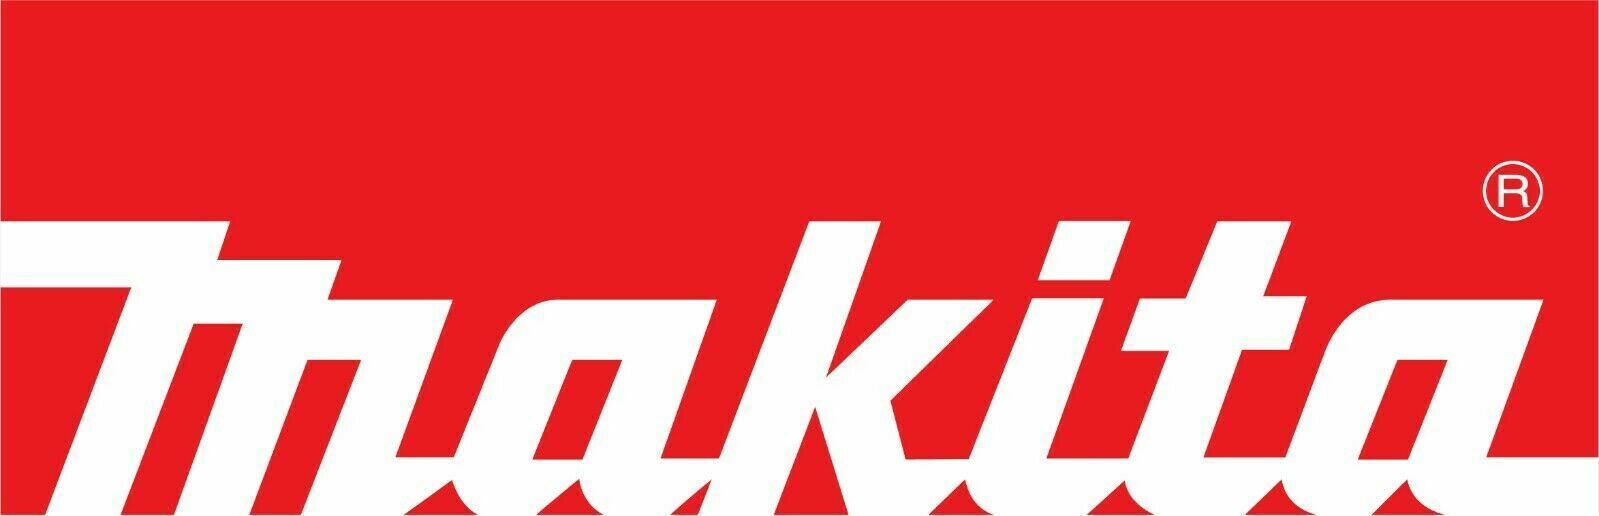 Makita Tools Logo Sticker / Vinyl Decal  | 10 Sizes with TRACKING